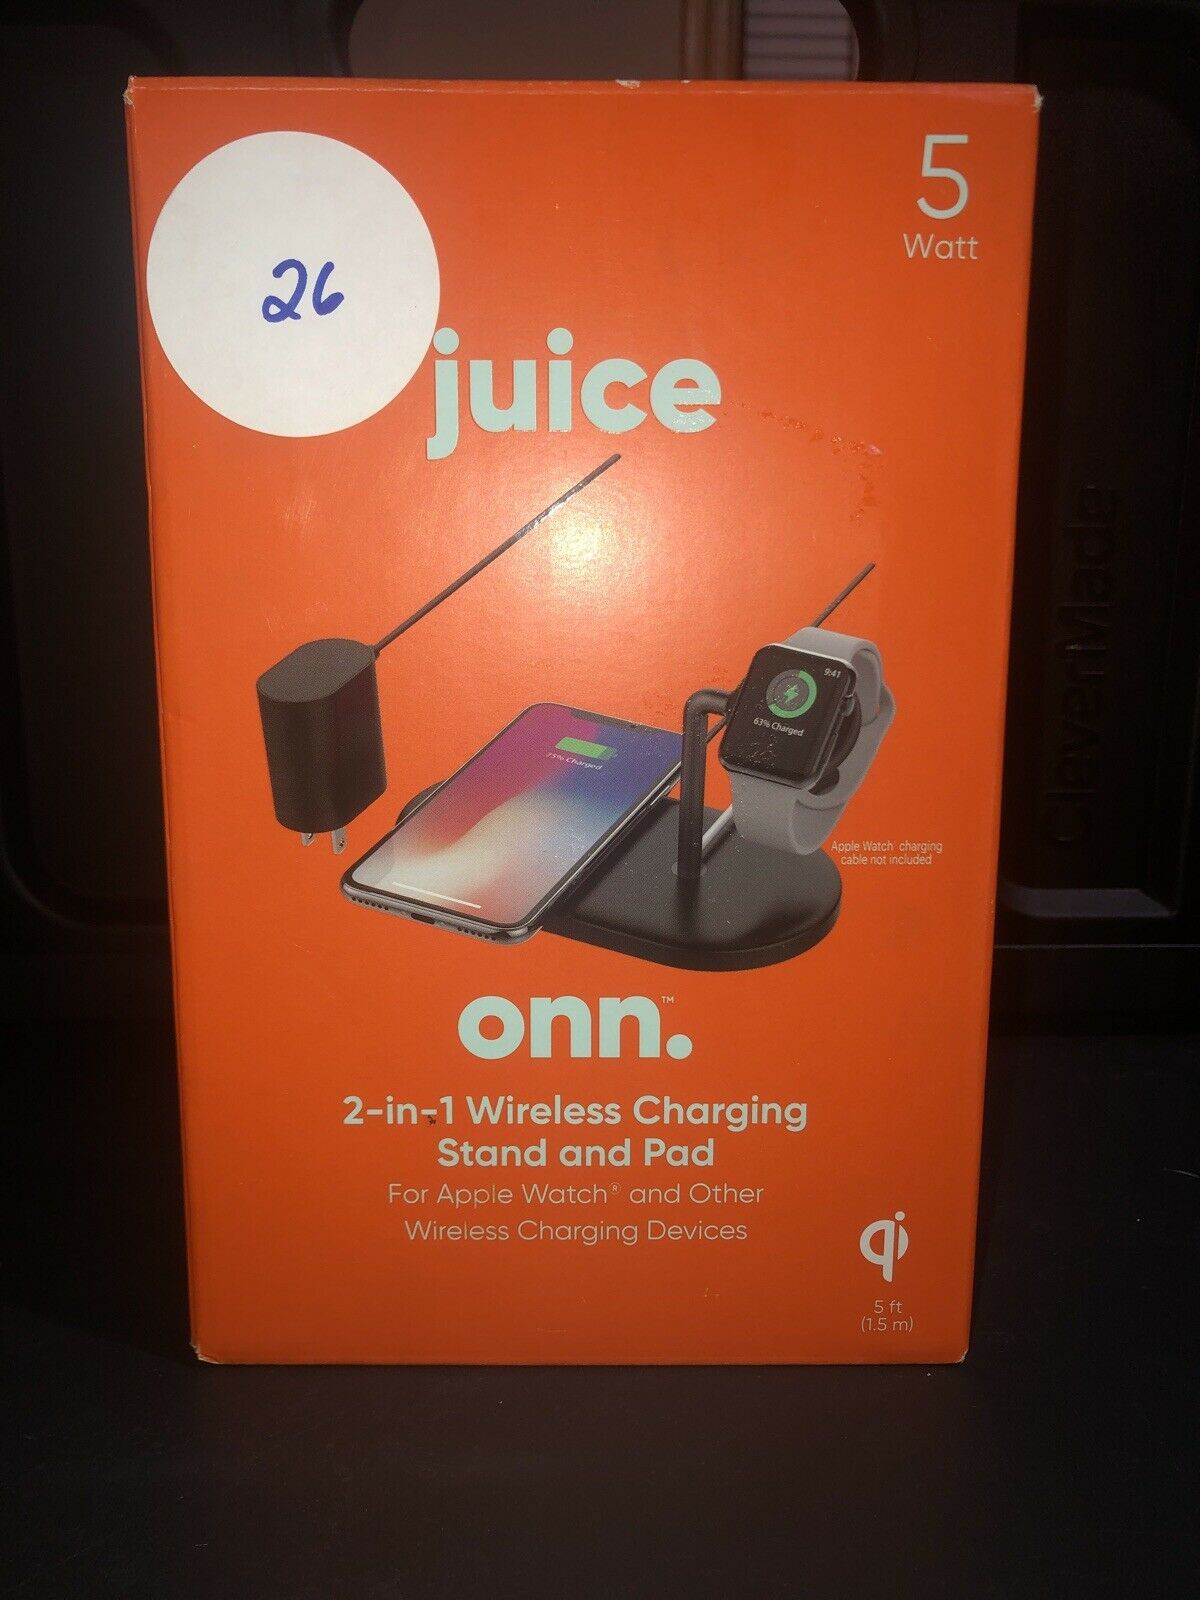 Juice Onn 2-in-1 Wireless Charging Stand & Pad 5W for Apple Watch & other Qi